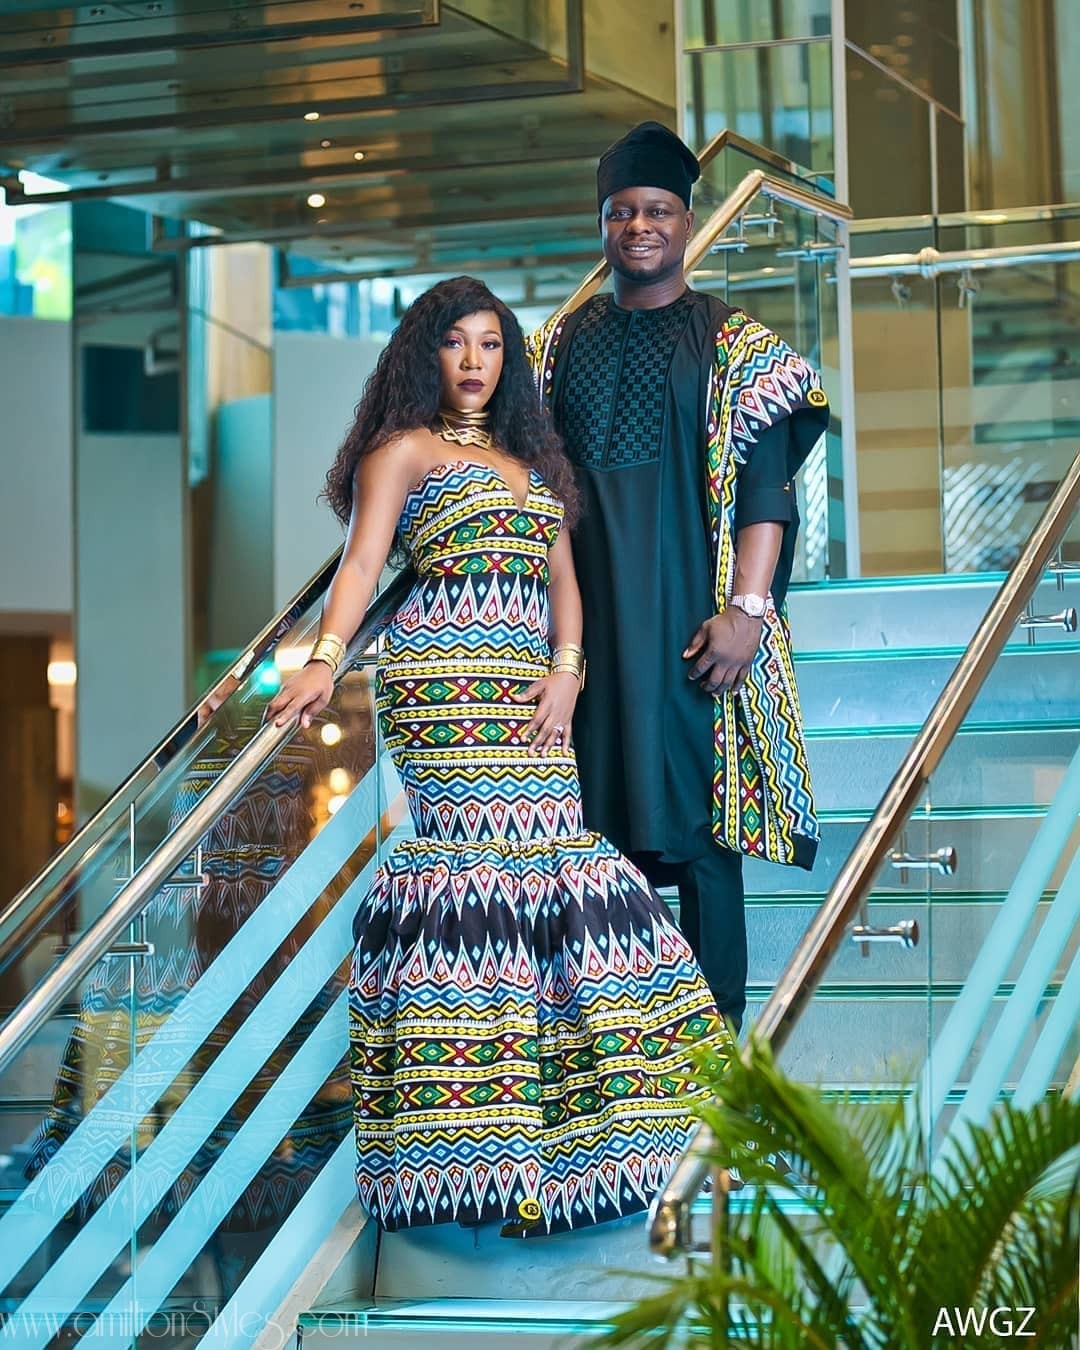 Would You Like To Twin With Bae? These Styles Are Great For Pre-Wedding Outfits